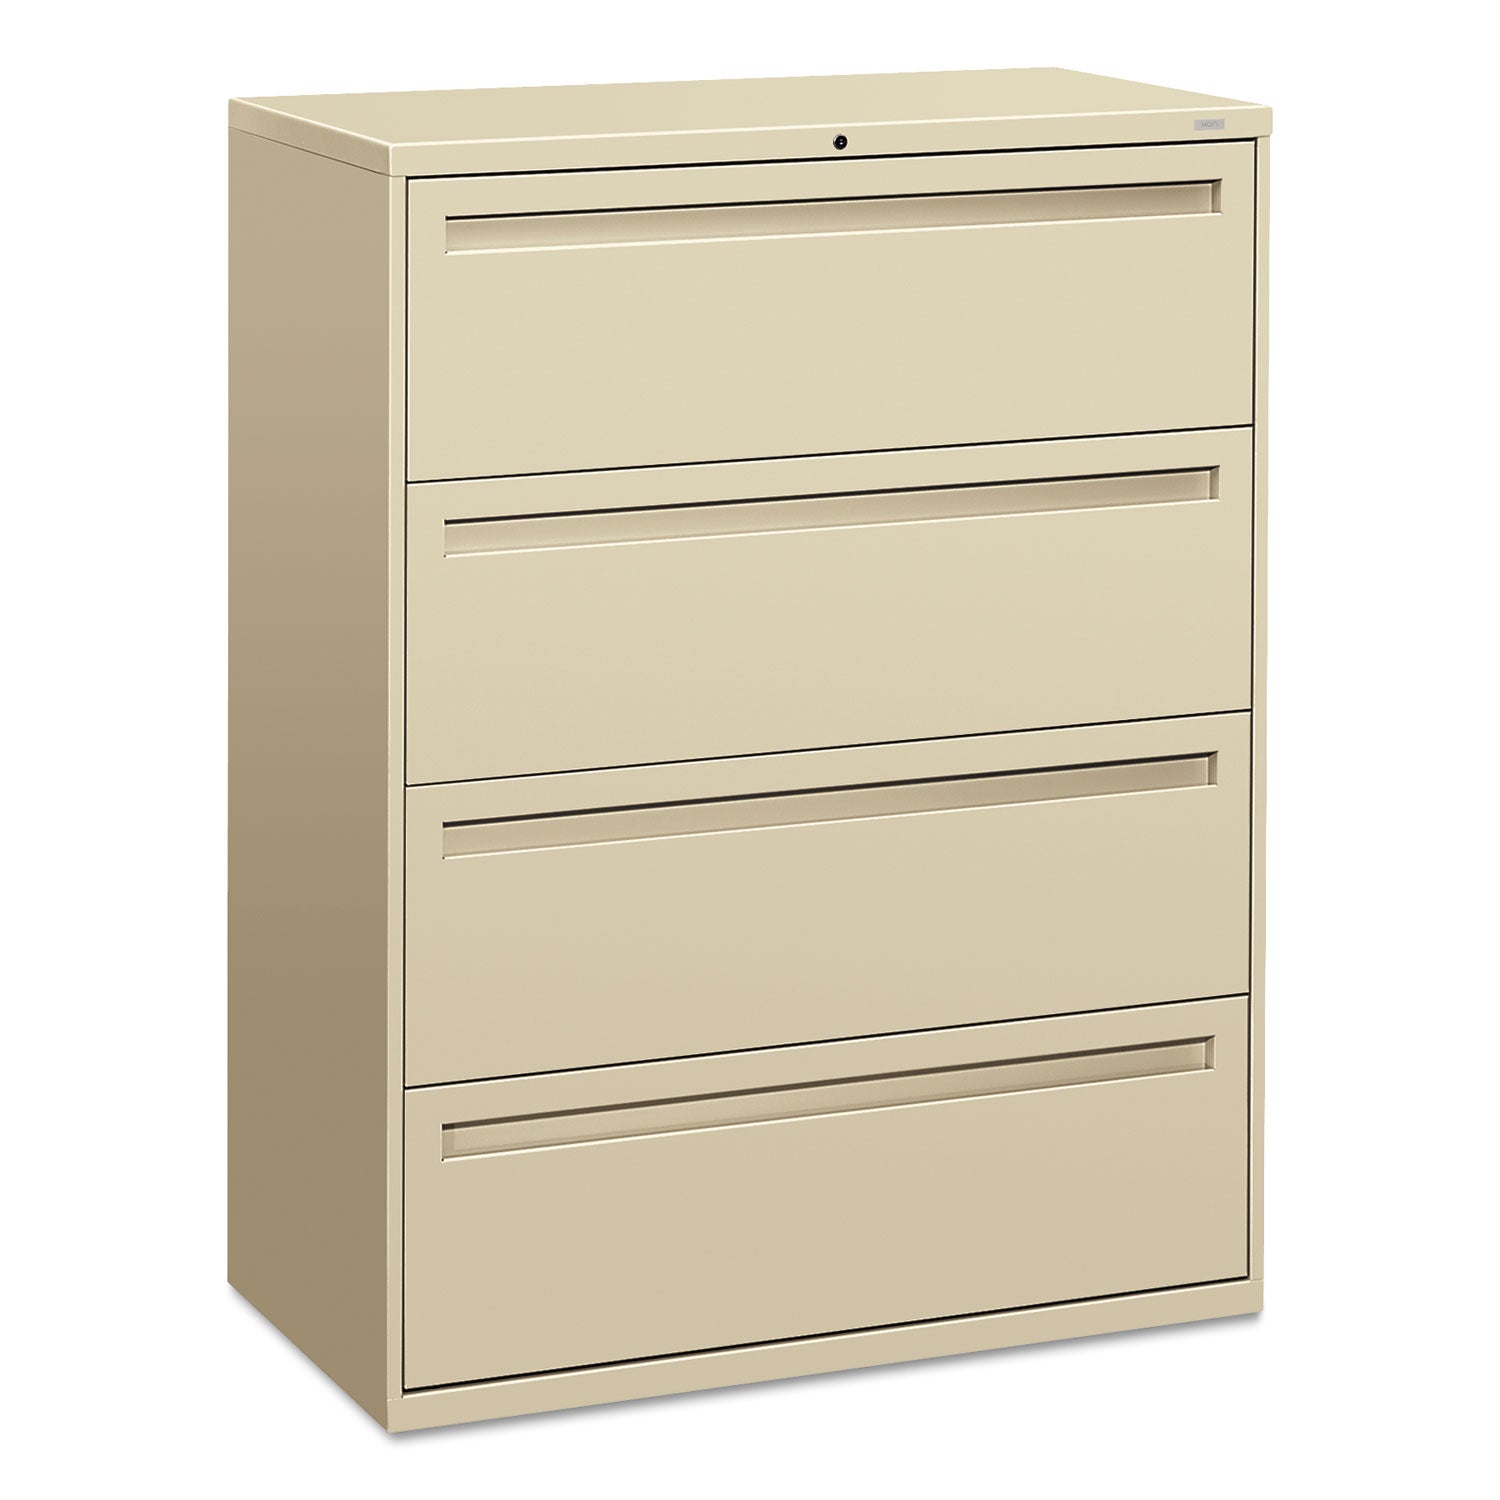 Brigade 700 Series Lateral File, 4 Legal/Letter-Size File Drawers, Putty, 42" x 18" x 52.5 - 